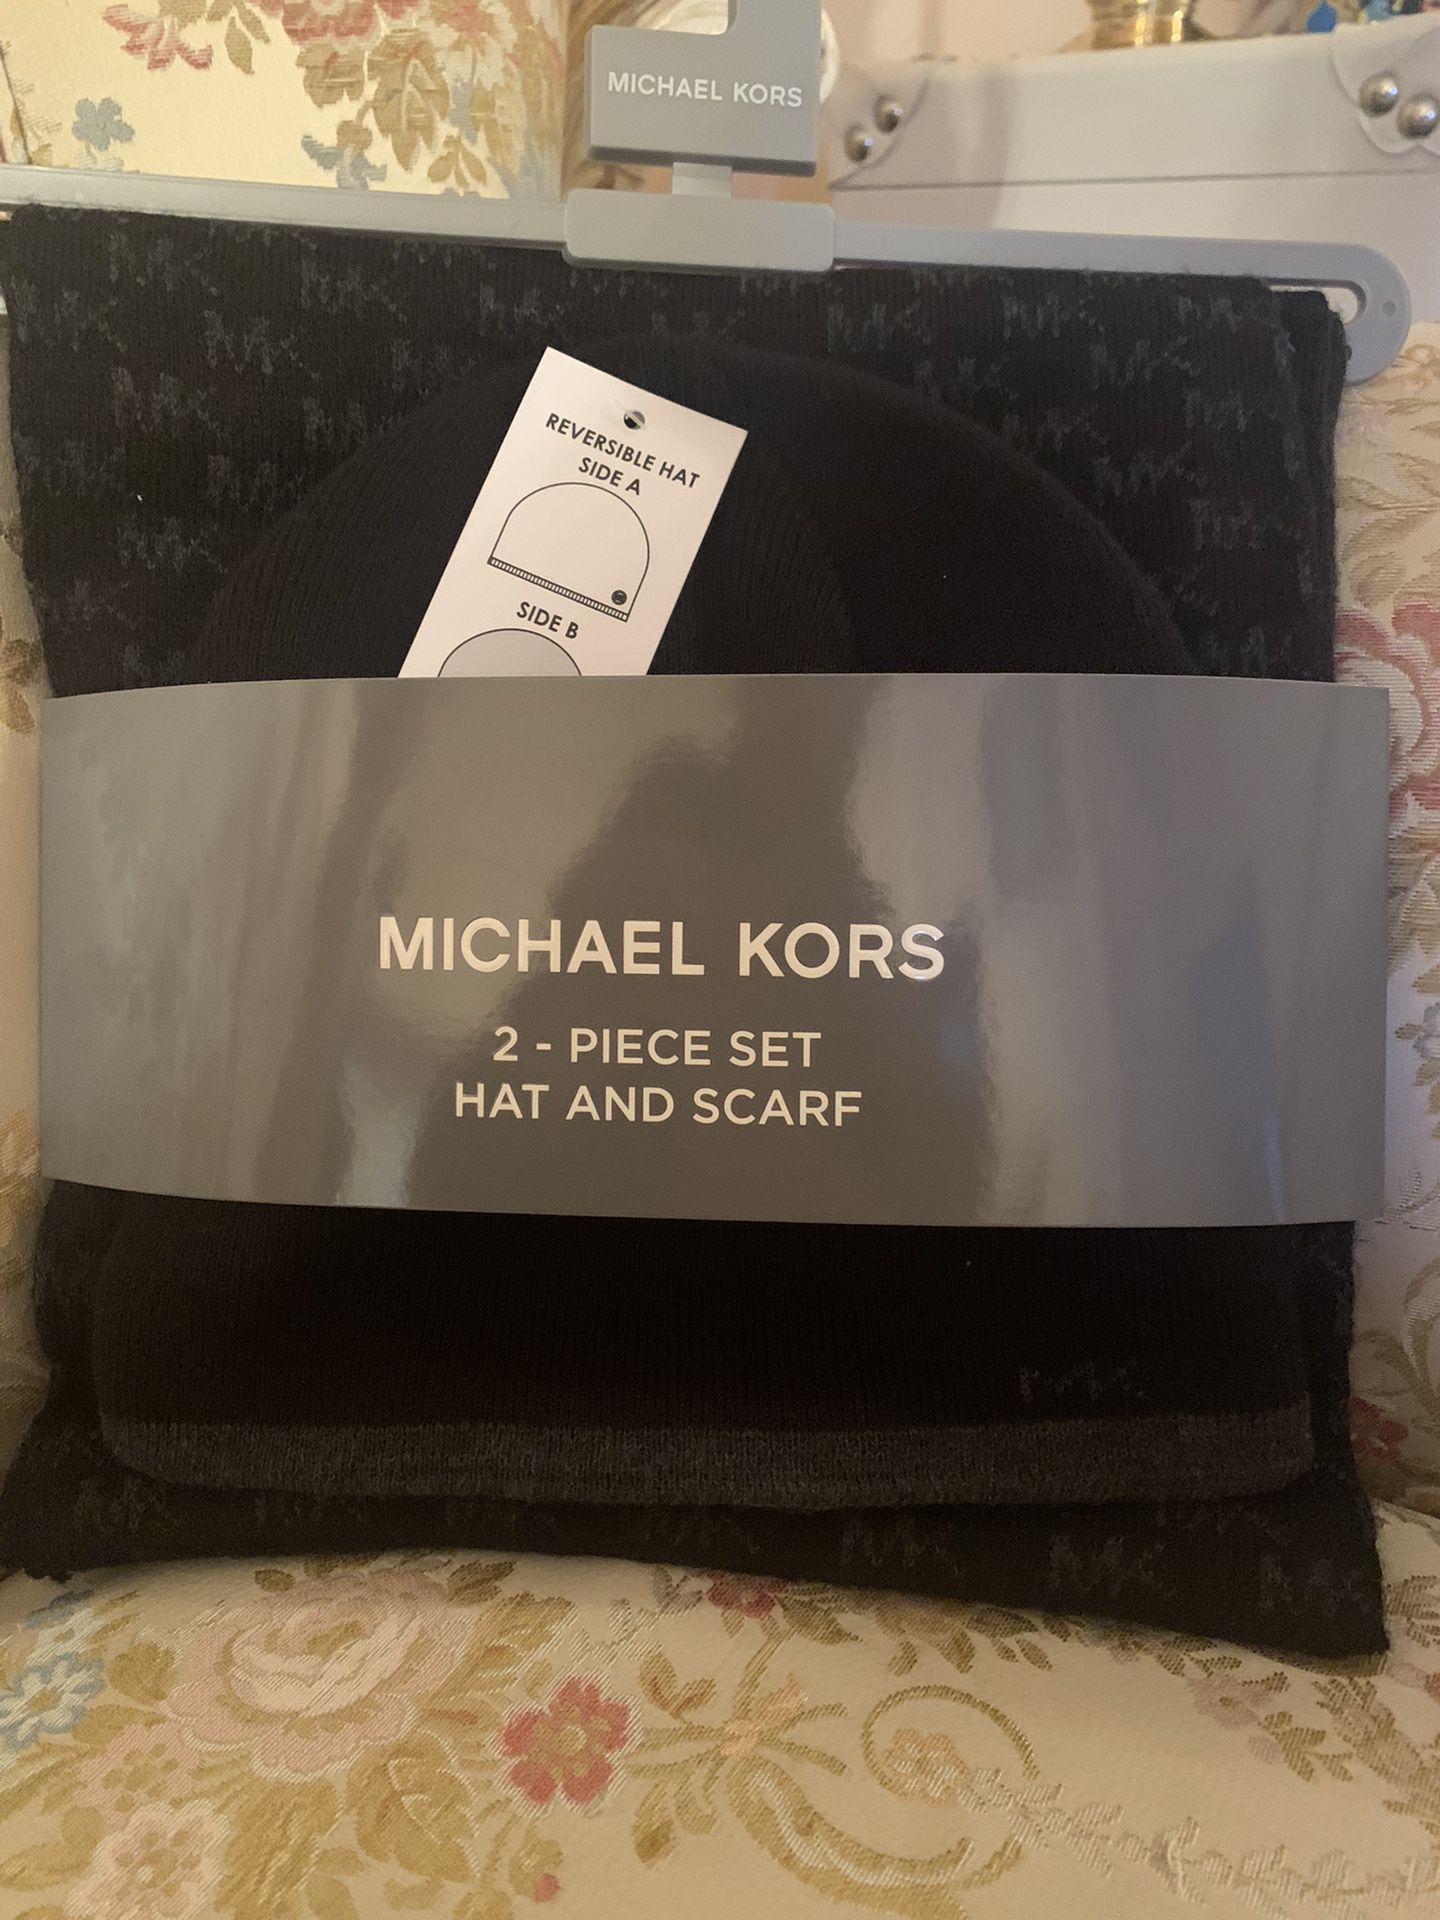 Michael Kors 2-Piece Set Hat And Scarf Monogram New With Tags